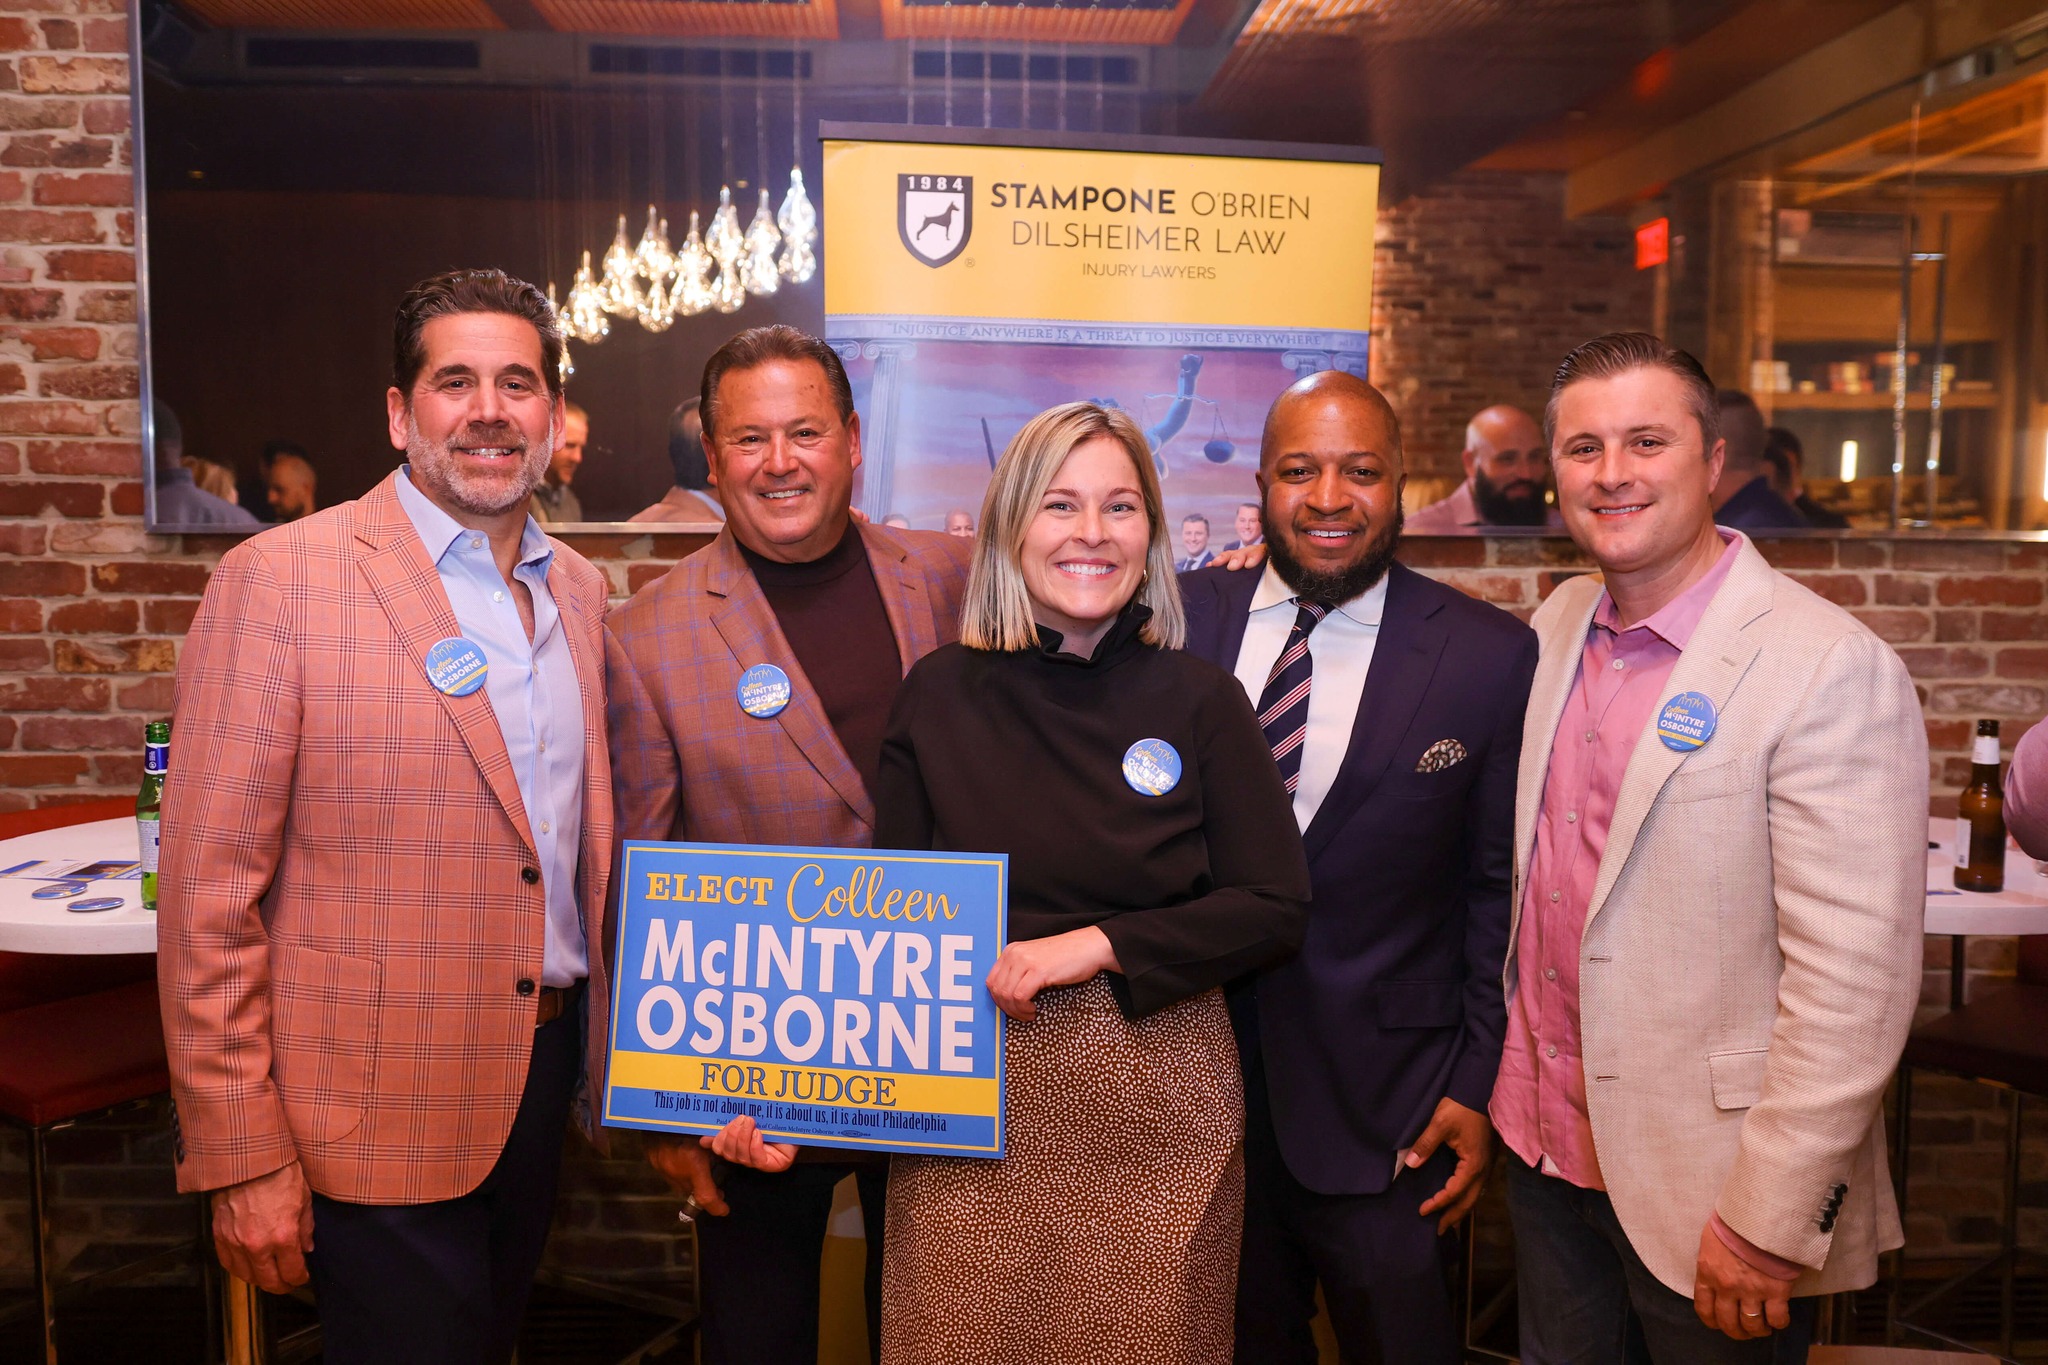 Stampone O’Brien Dilsheimer Law recently held a fundraiser in support of Colleen McIntyre Osborne for Judge.